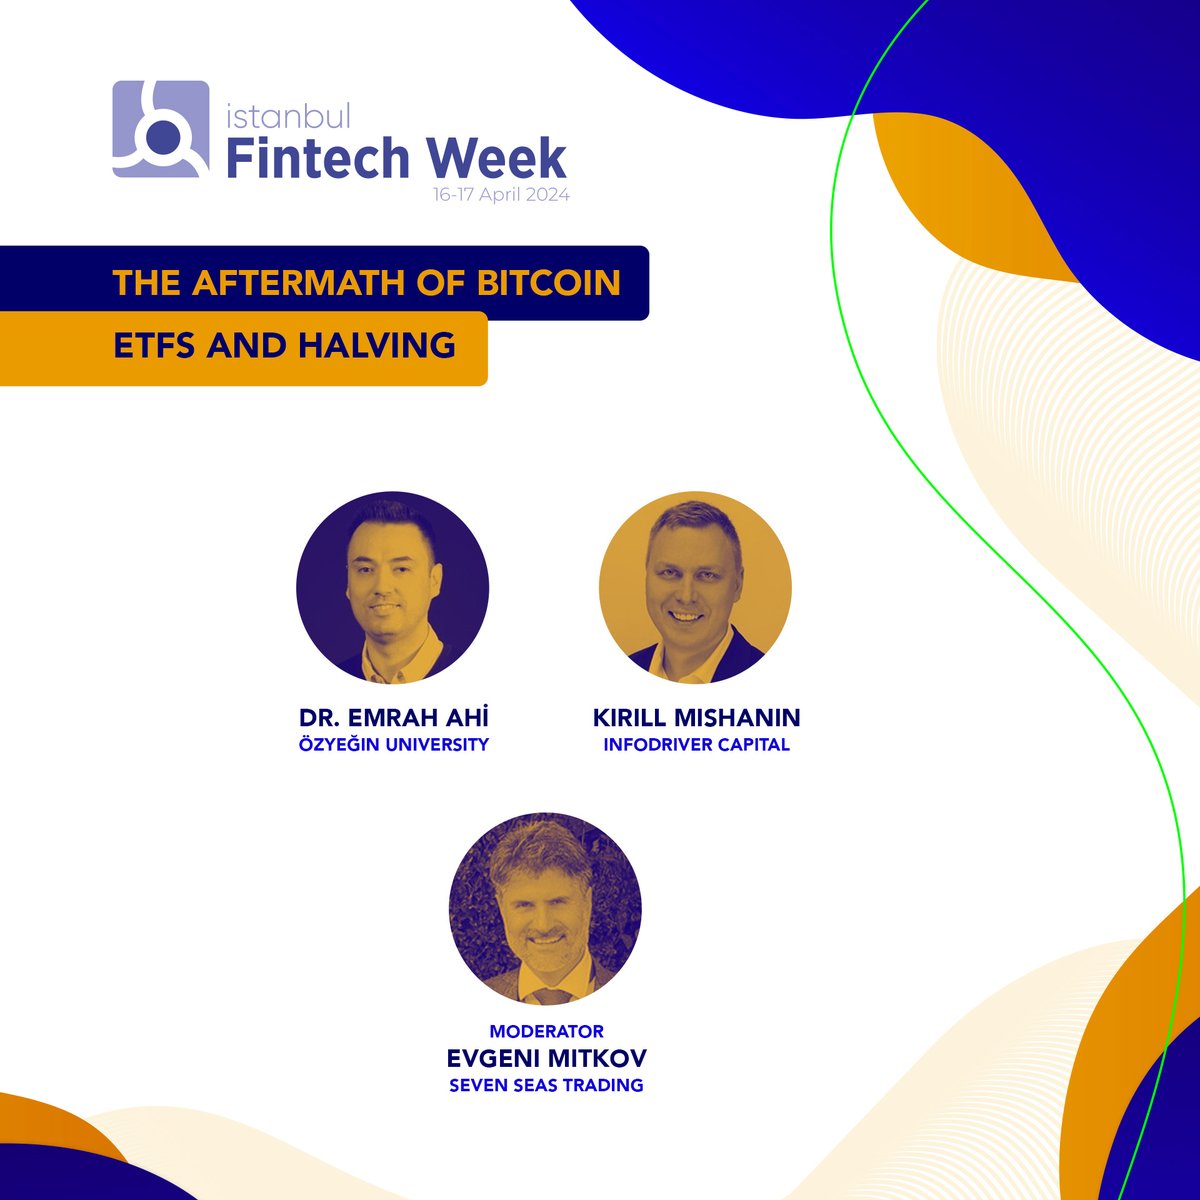 📢 The Aftermath of Bitcoin EFTs and Halving We will be discussing 'The Aftermath of Bitcoin EFTs and Halving' with Kirill Mishanin, Dr. Emrah Ahi, and Evgeni Mitkov at our Web3 Summit! Interested in Bitcoin? Get your ticket today and join us at IFW'24! 🎟️